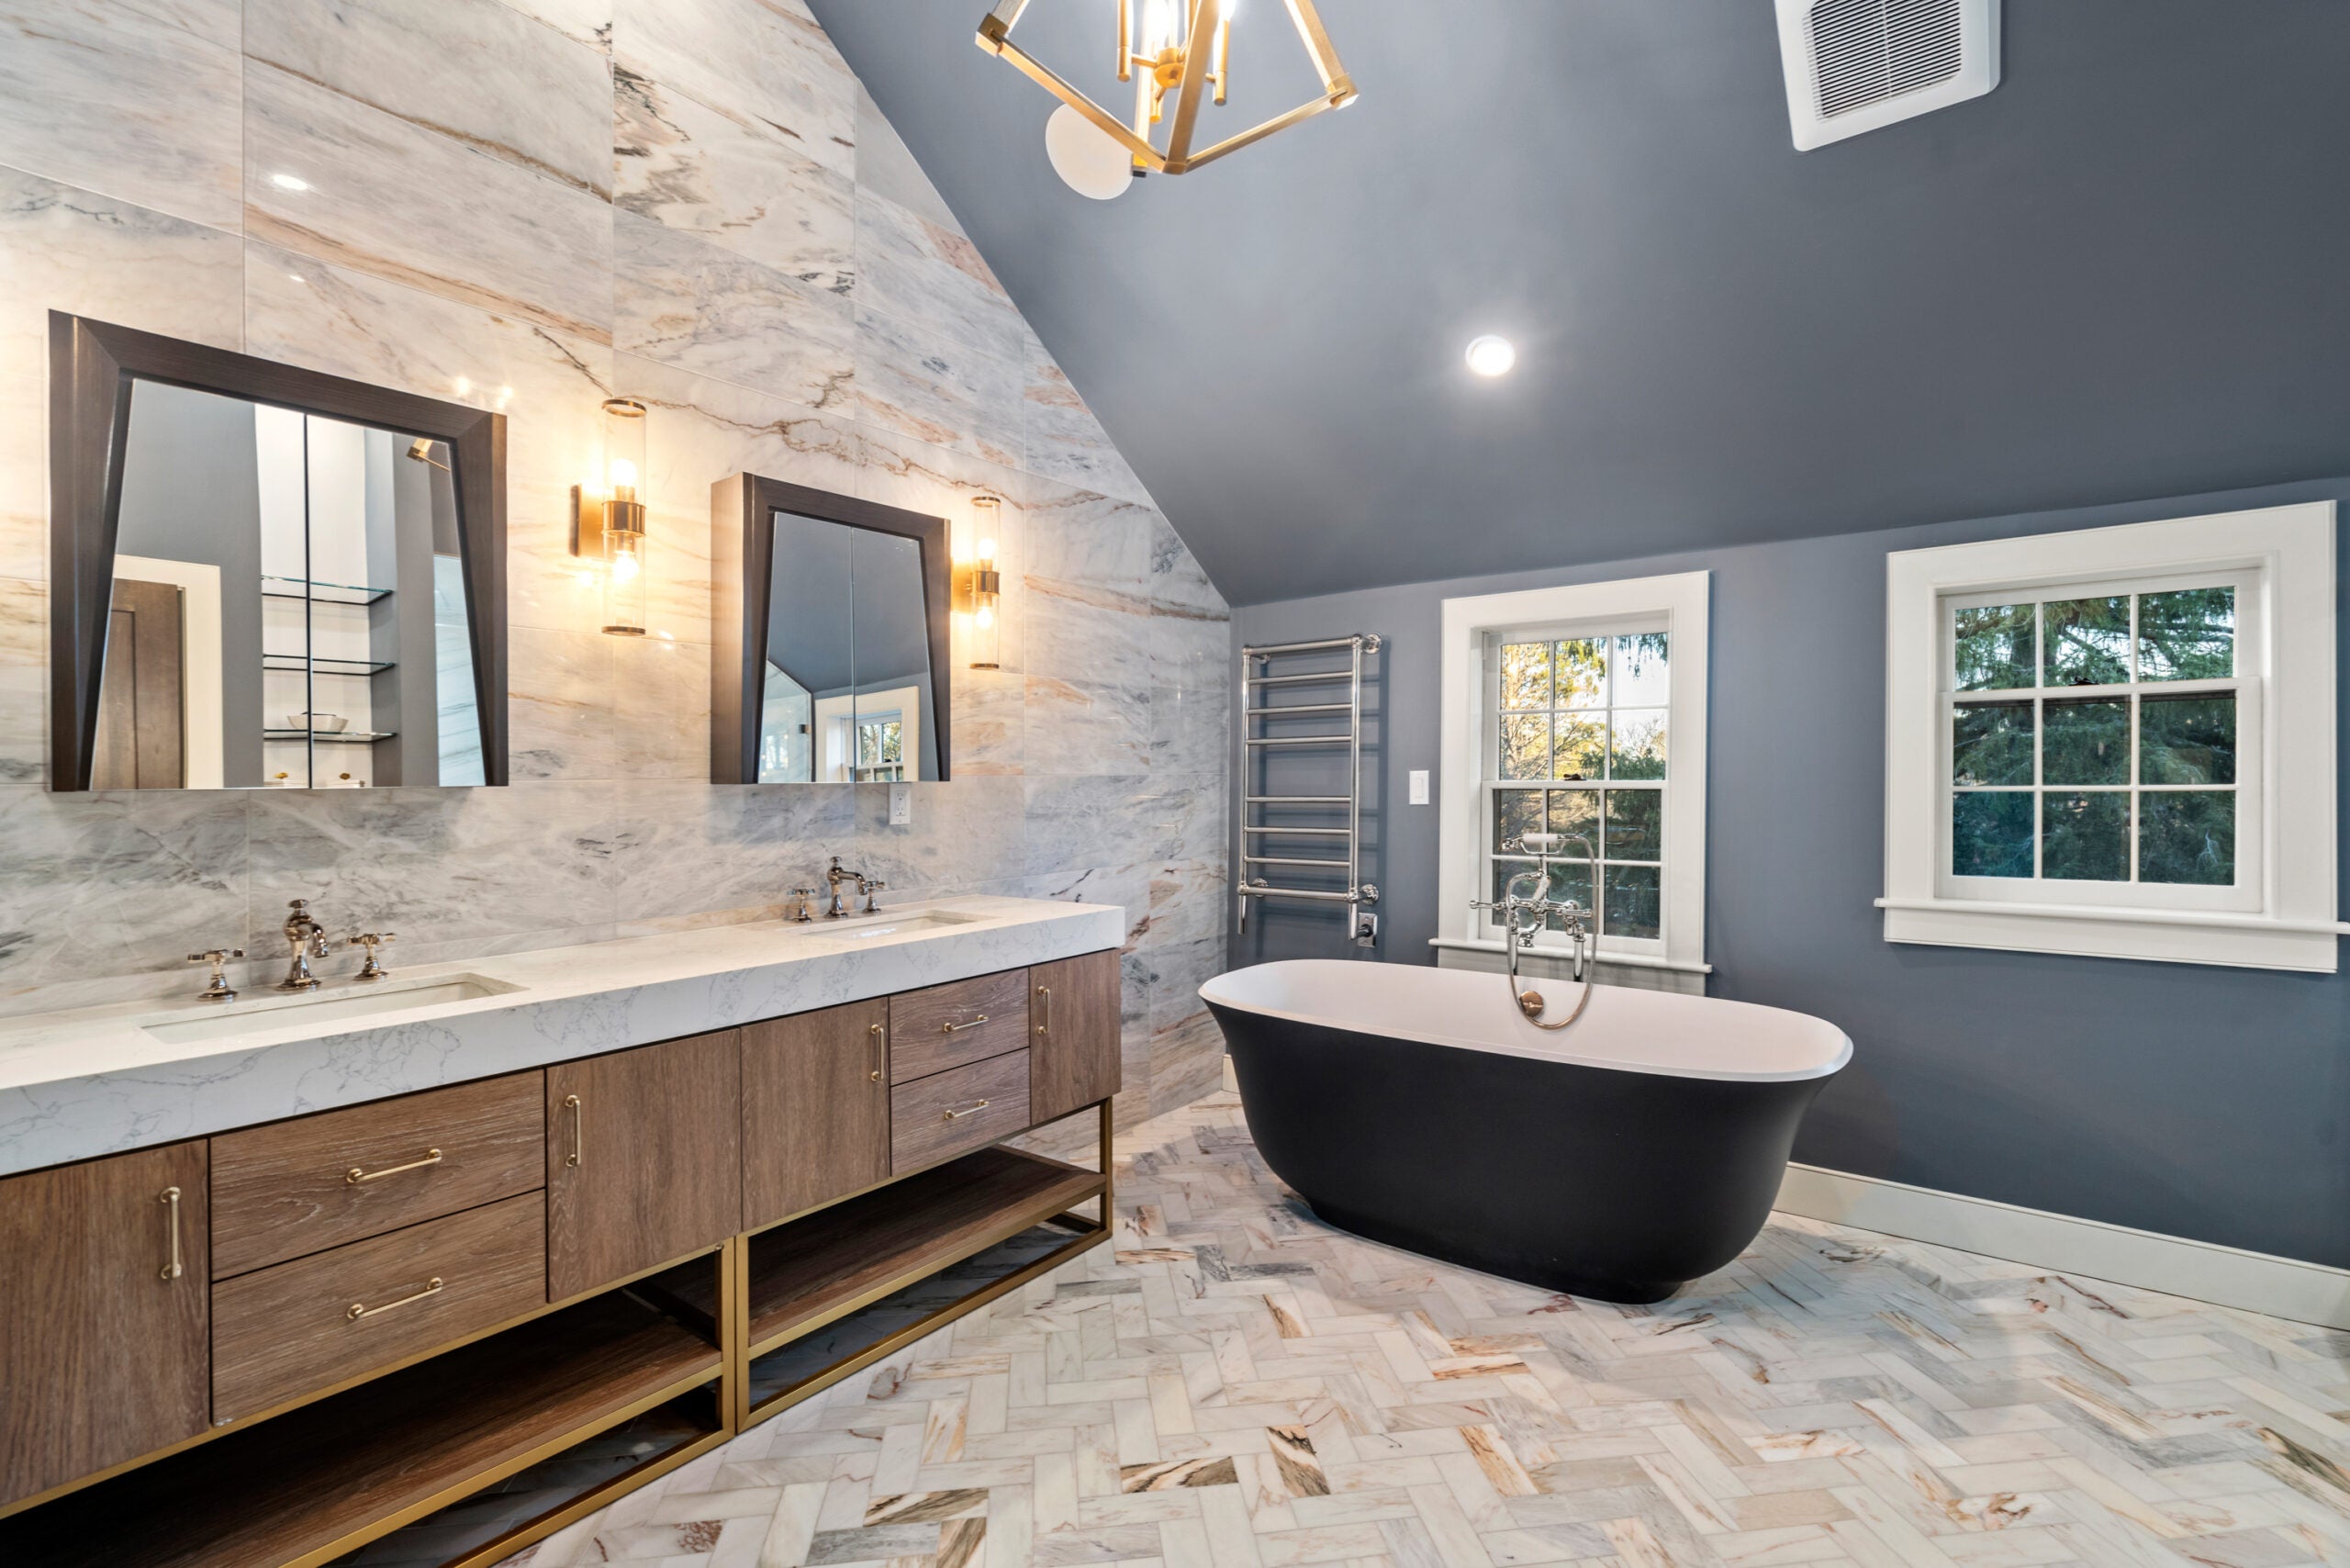 The bathroom has vaulted ceilings, a double vanity, standalone bathtub and walk-in shower.